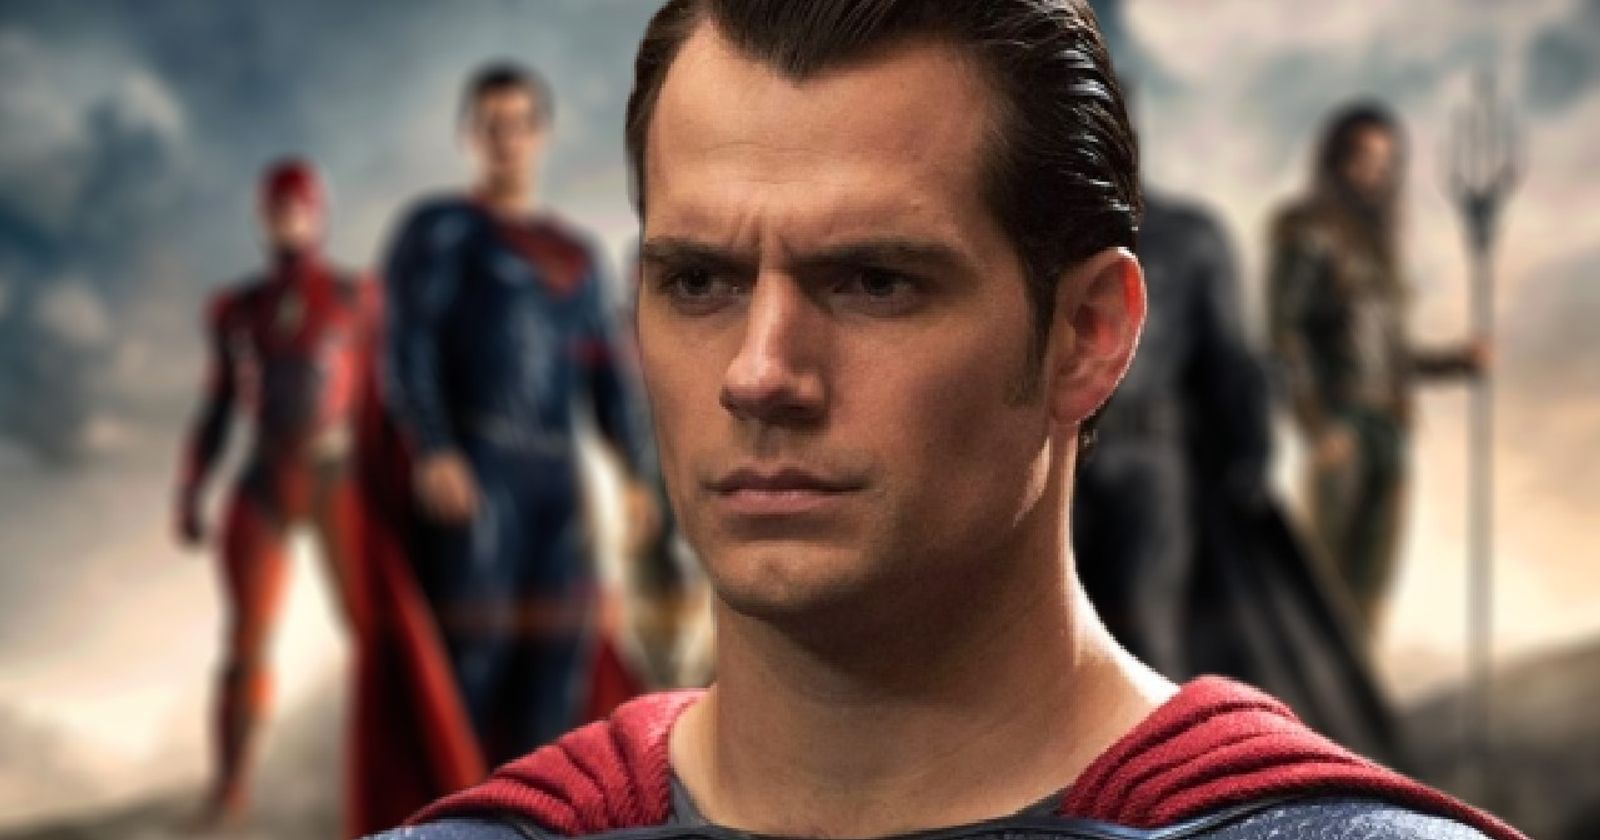 Superman's far more than skin color: Warner Bros Made Henry Cavill's Wish  Come True After Firing Him From DCEU - FandomWire